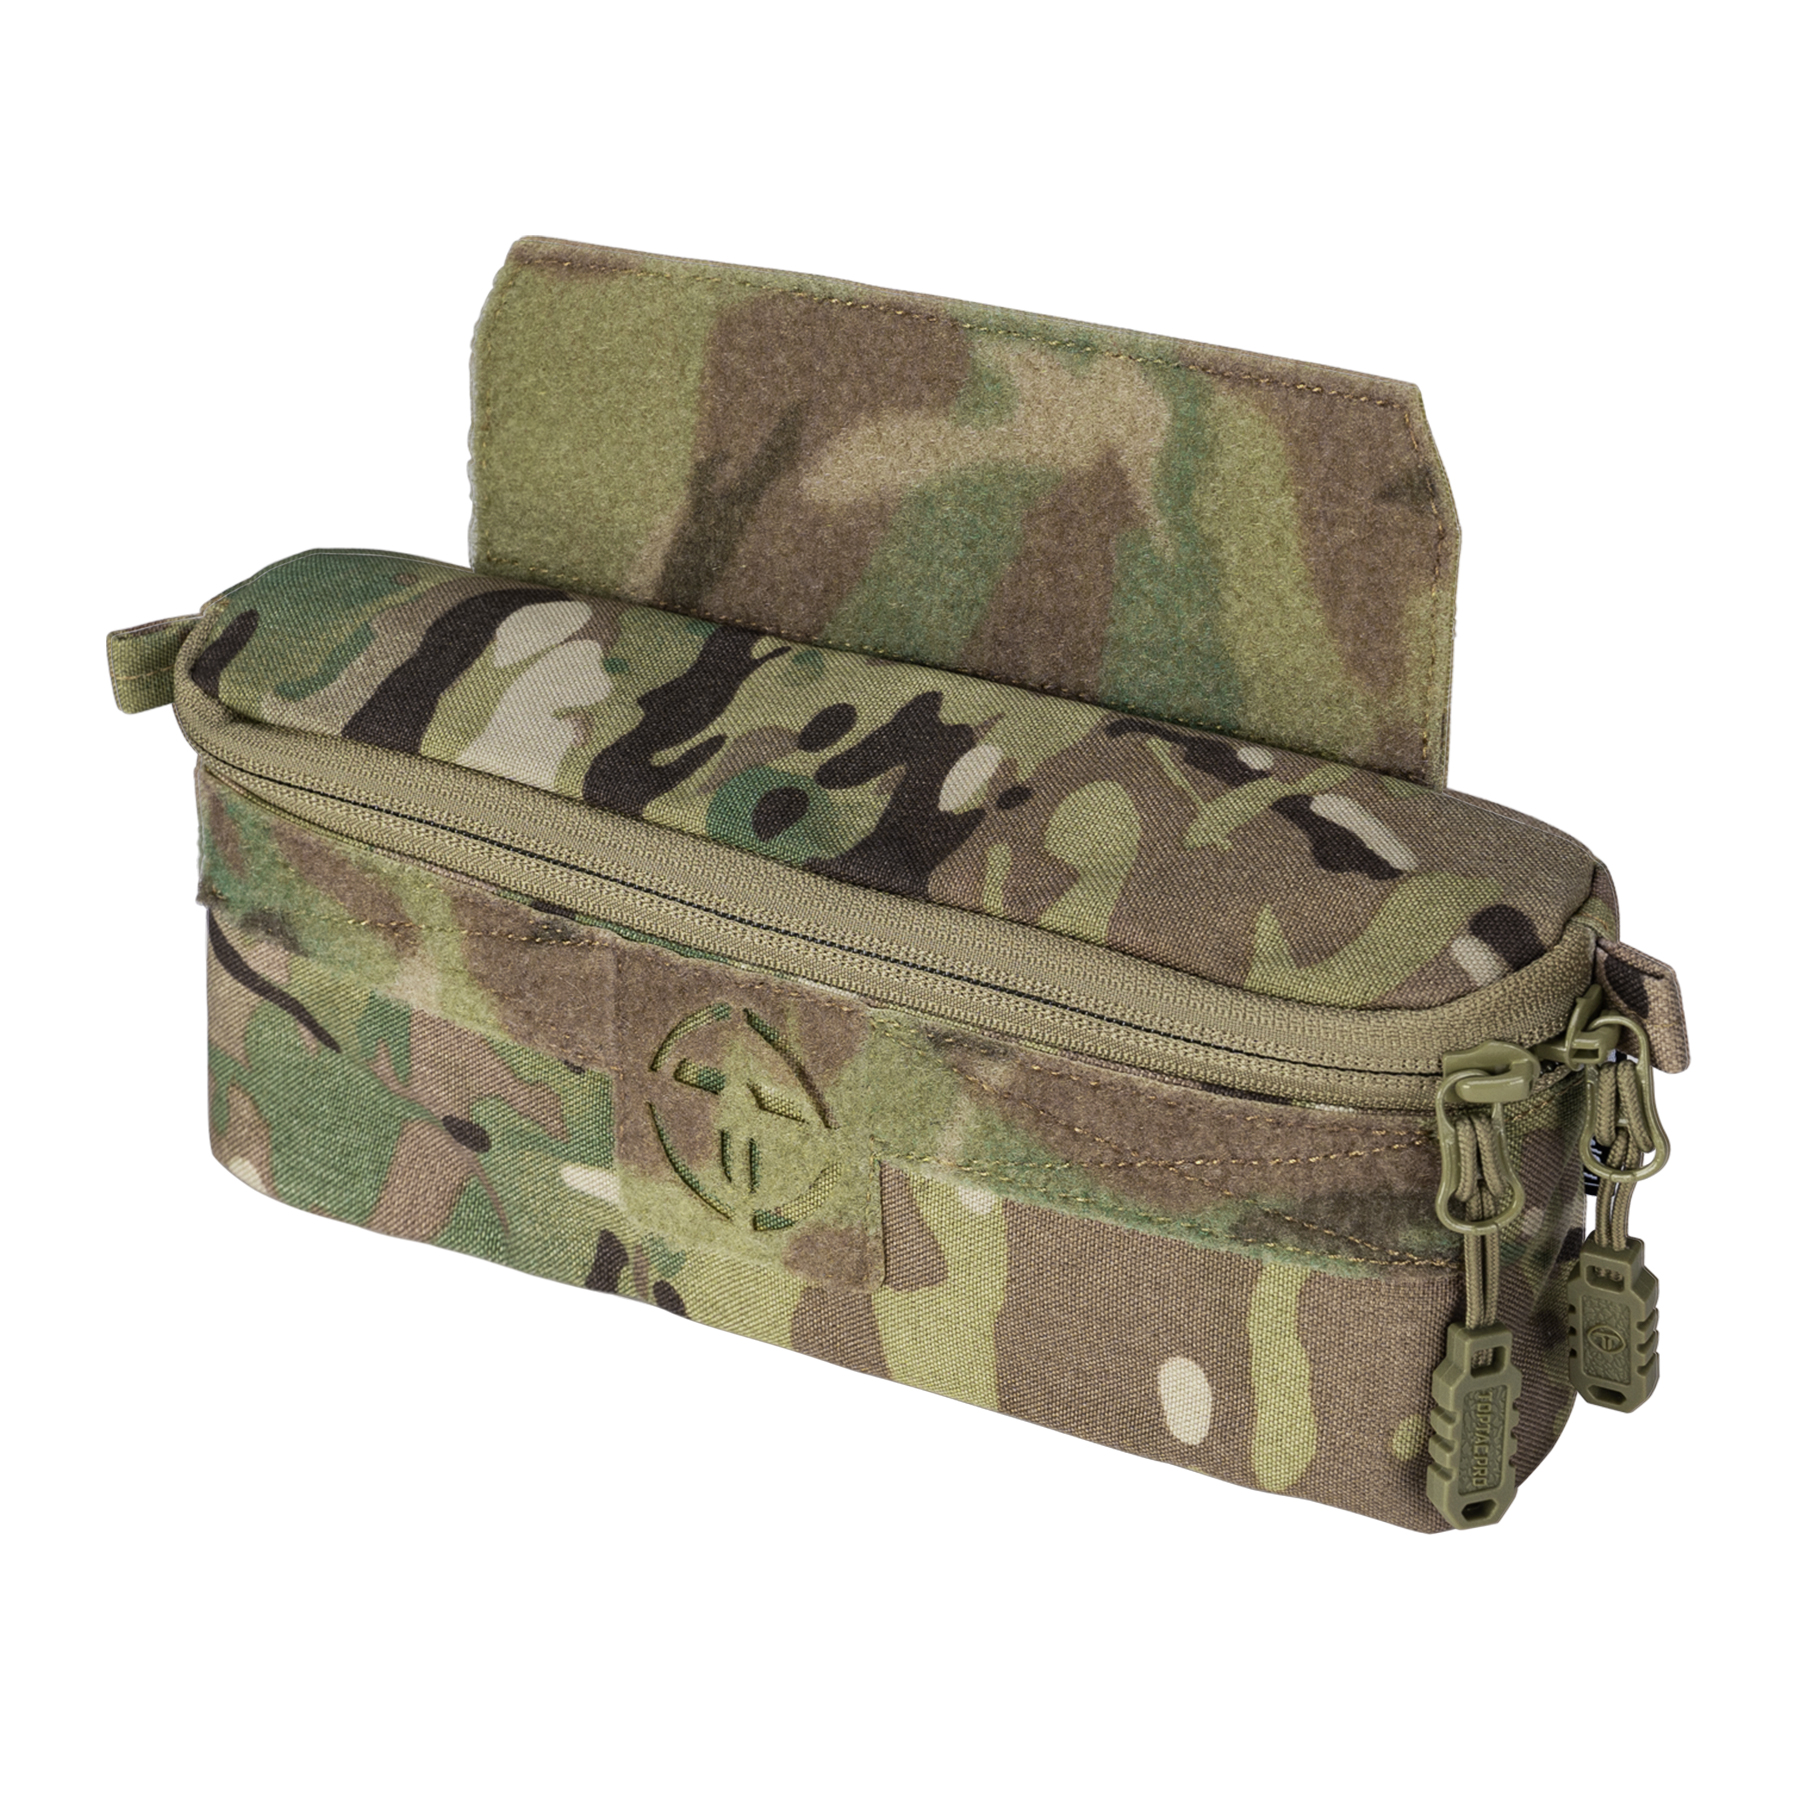 TOPTACPRO Tactical Dump Drop Pouch Molle Admin Pouch Utility Tool Organizer Pouch Multicamo for JPC CPC AVS Vest Airsoft Paintball (Bag Only)8506-IDOGEAR INDUSTRIAL